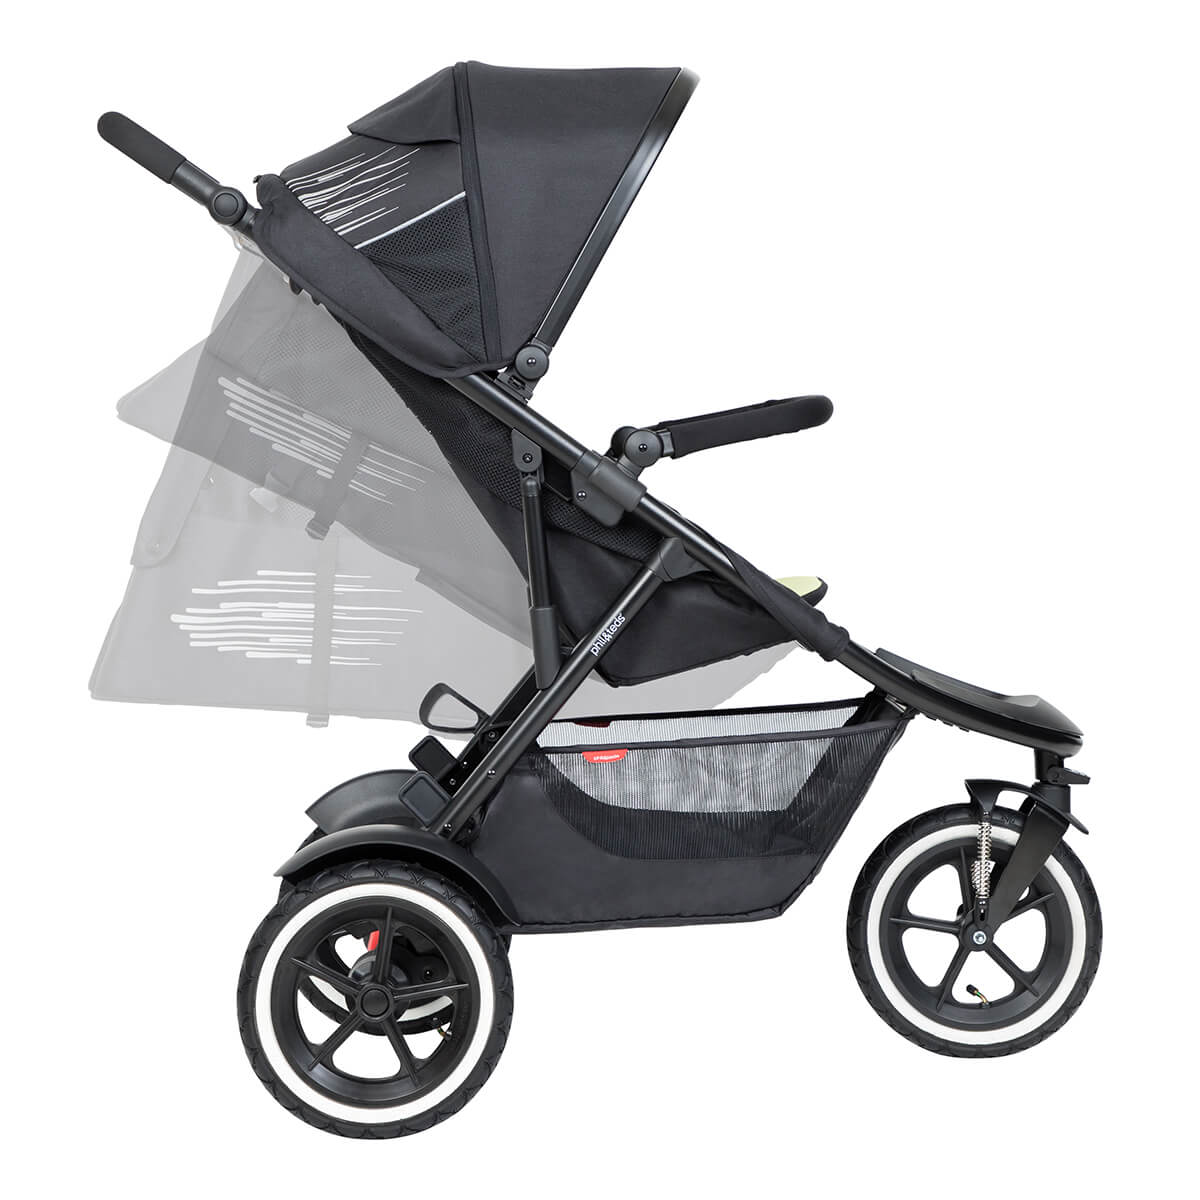 https://cdn.accentuate.io/7266900738101/19118870462517/philteds-sport-buggy-can-recline-in-multiple-angles-including-full-recline-for-newborn-baby-v1700693463754.jpg?1200x1200